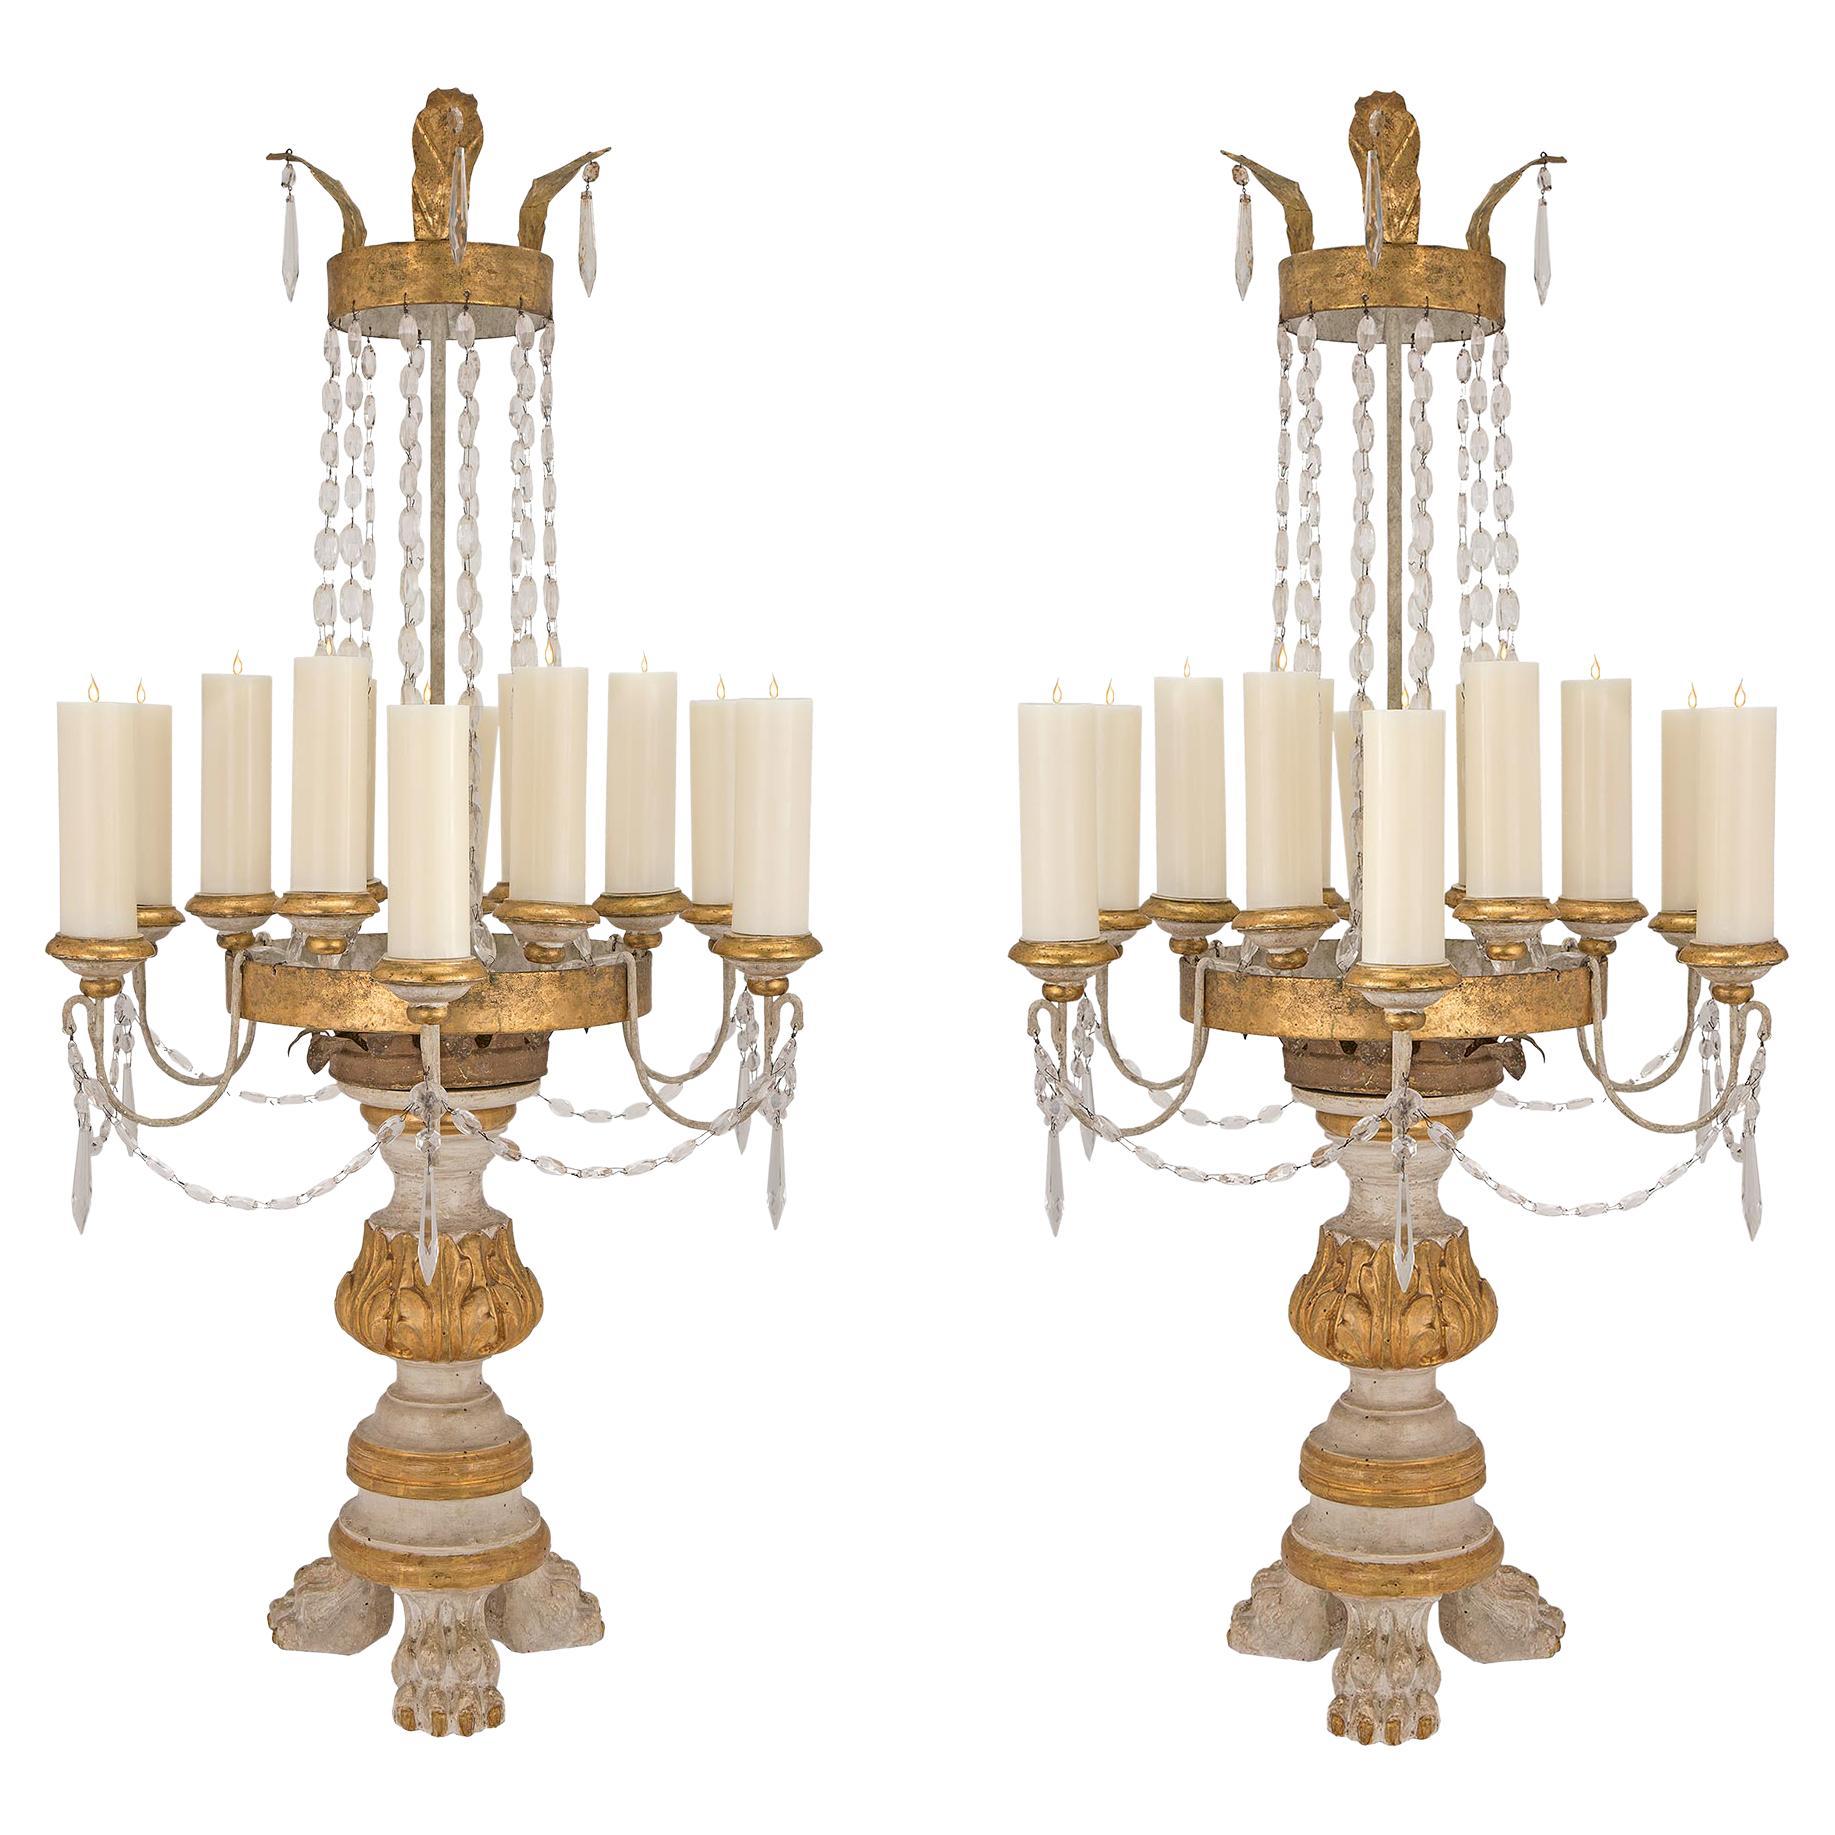 Pair of Italian 18th Century Giltwood and Gilt Metal Tuscan Candelabras